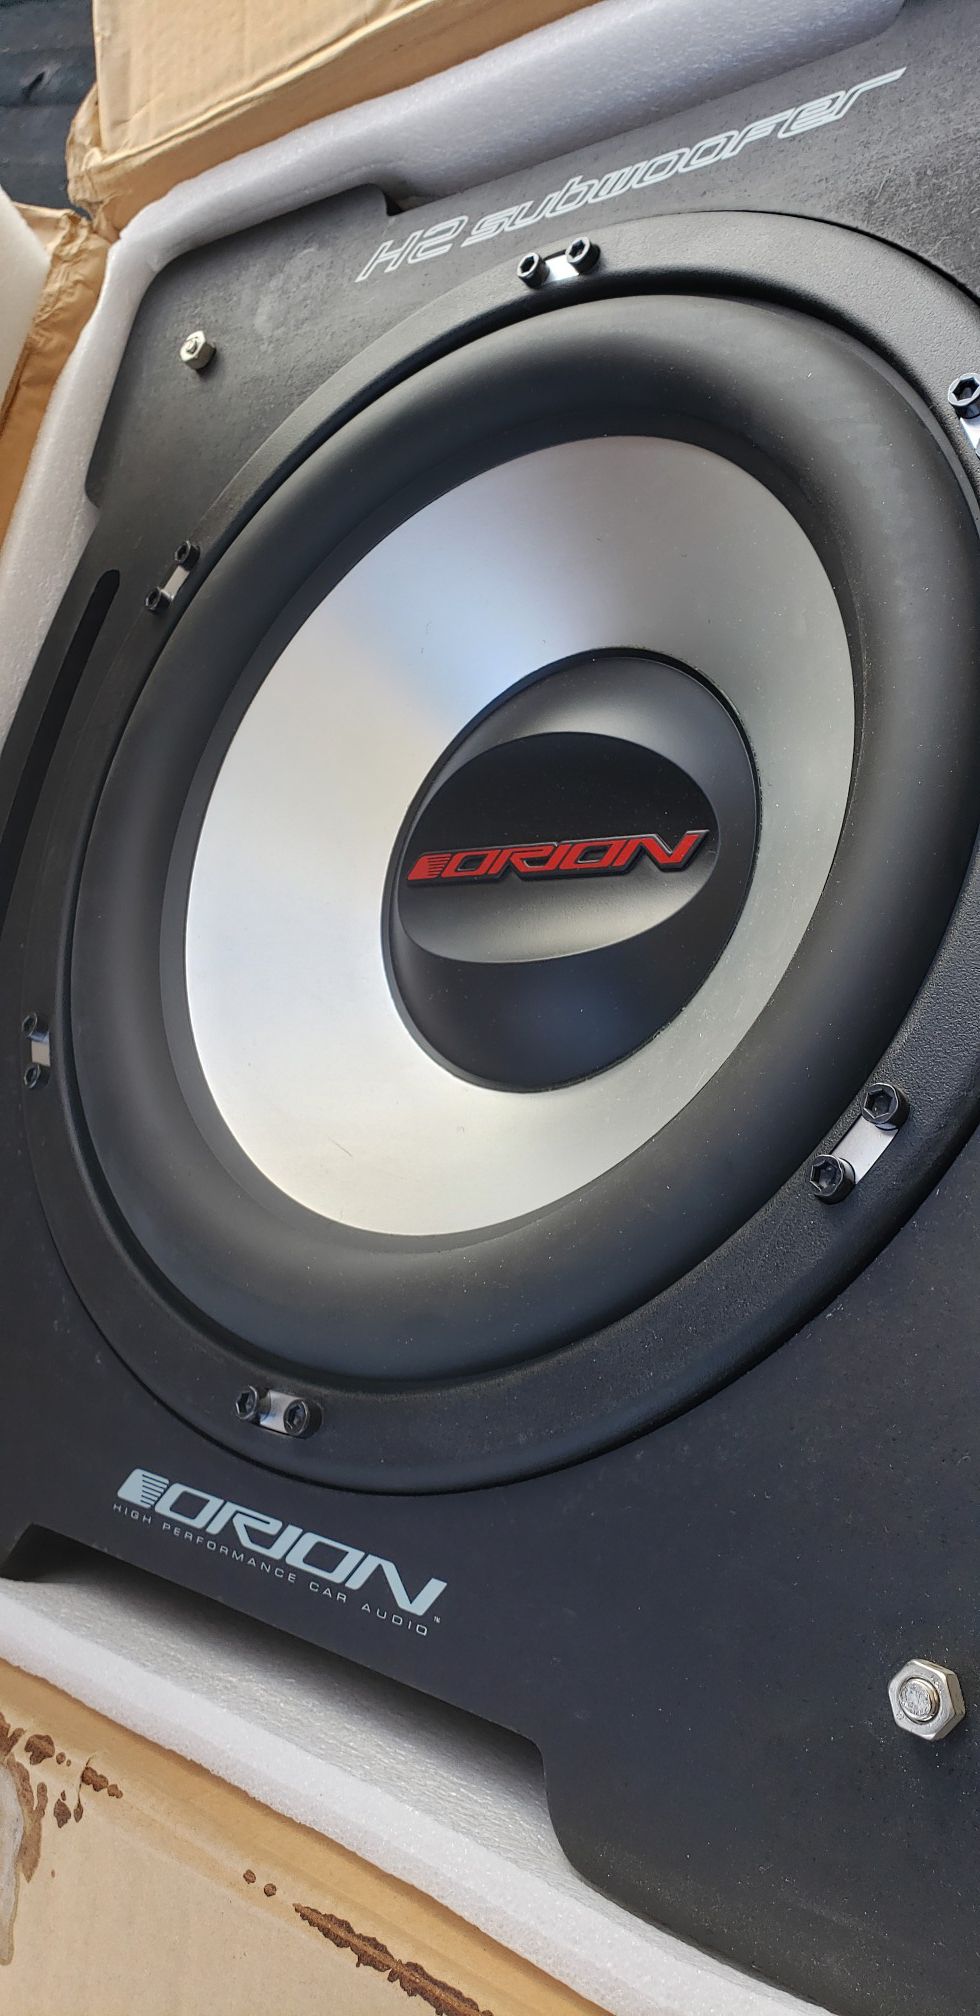 Orion H2 15" Sub subwoofer New In Box